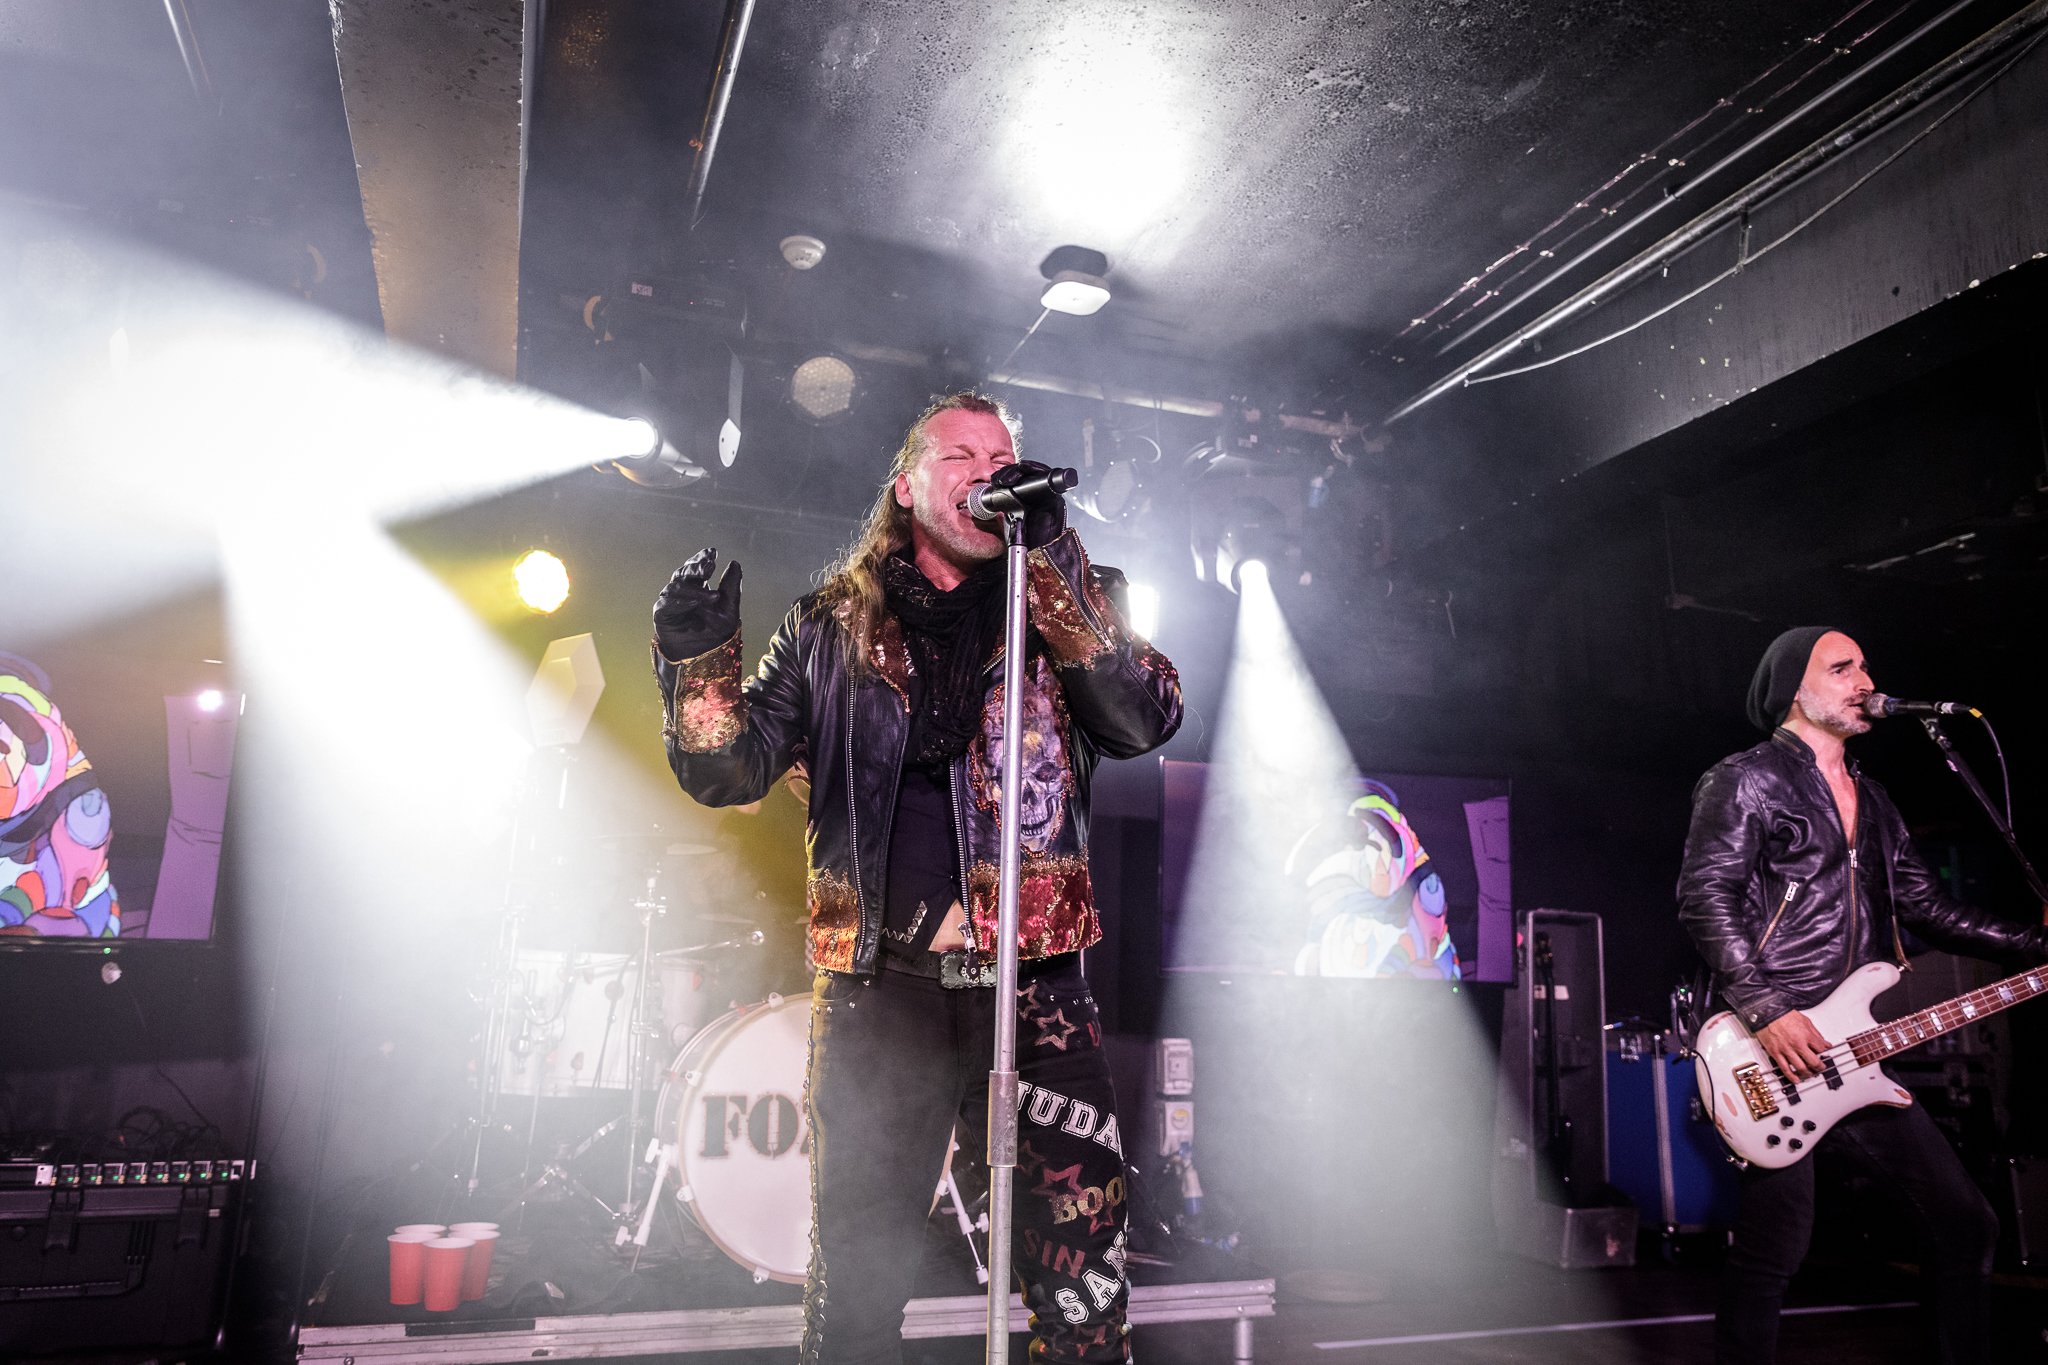 Fozzy at the Club Academy in Manchester on November 30th 2021 ©